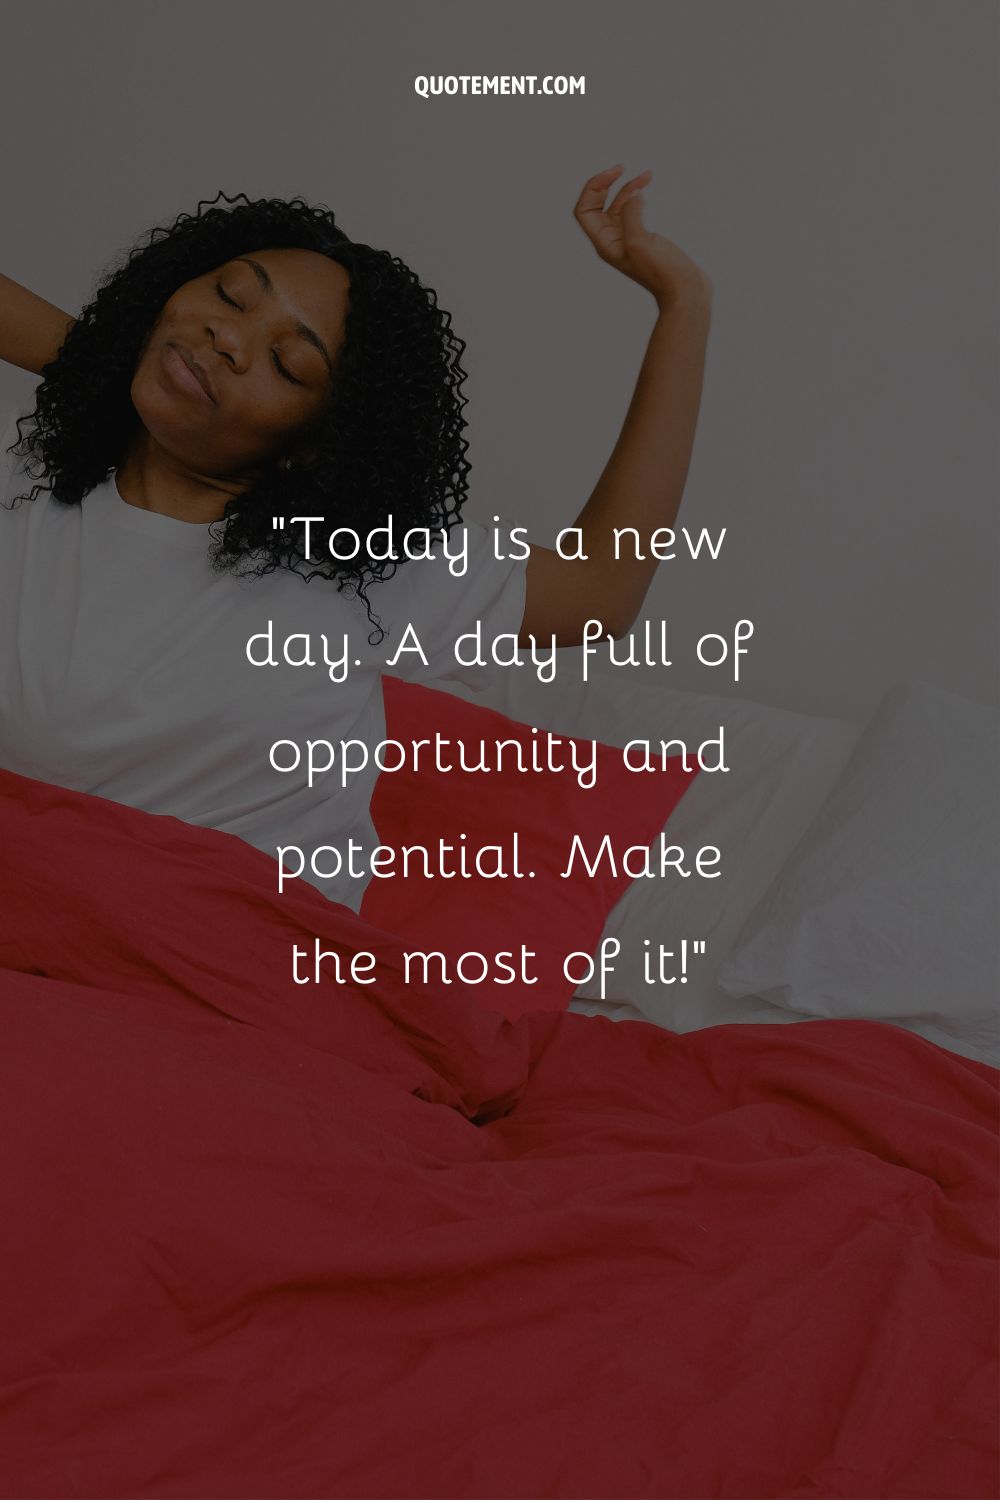 Today is a new day. A day full of opportunity and potential. Make the most of it